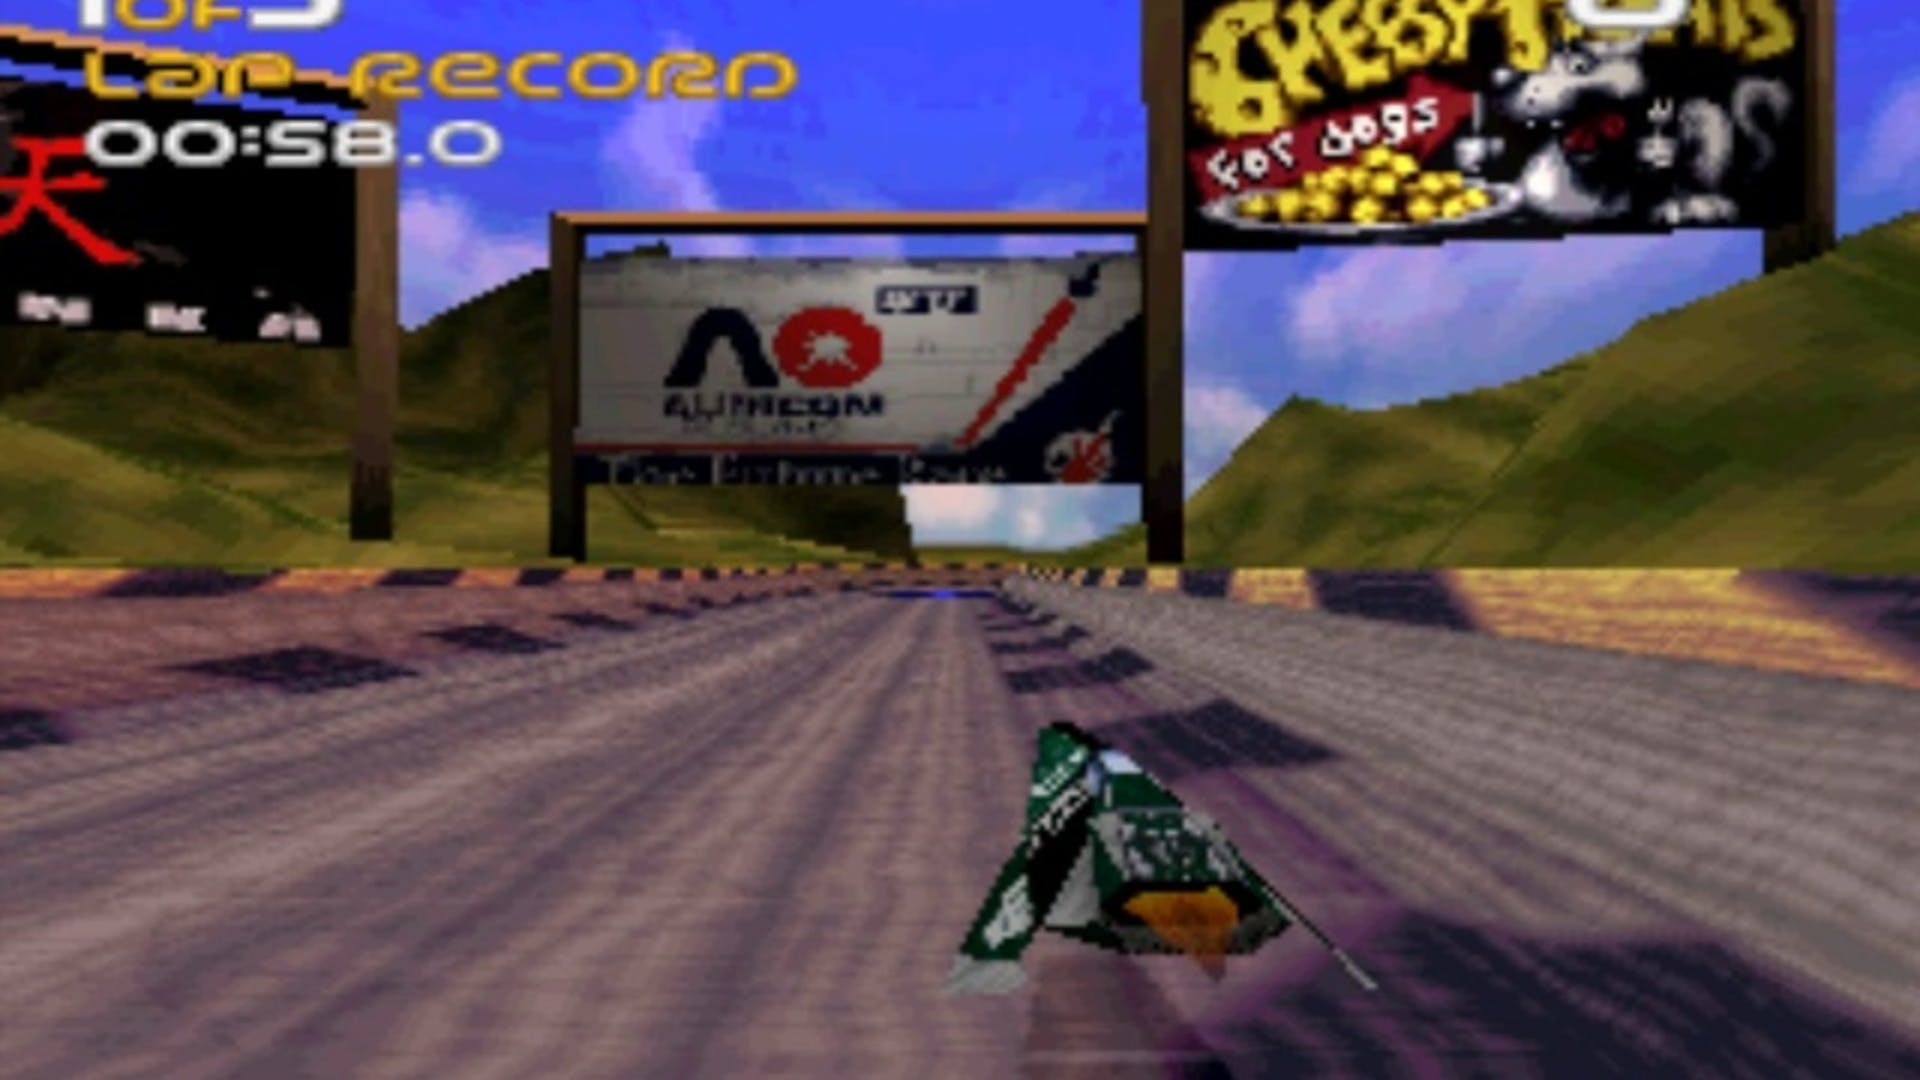 Wipeout ps1. Wipeout 1995. Wipeout ps1 диск.